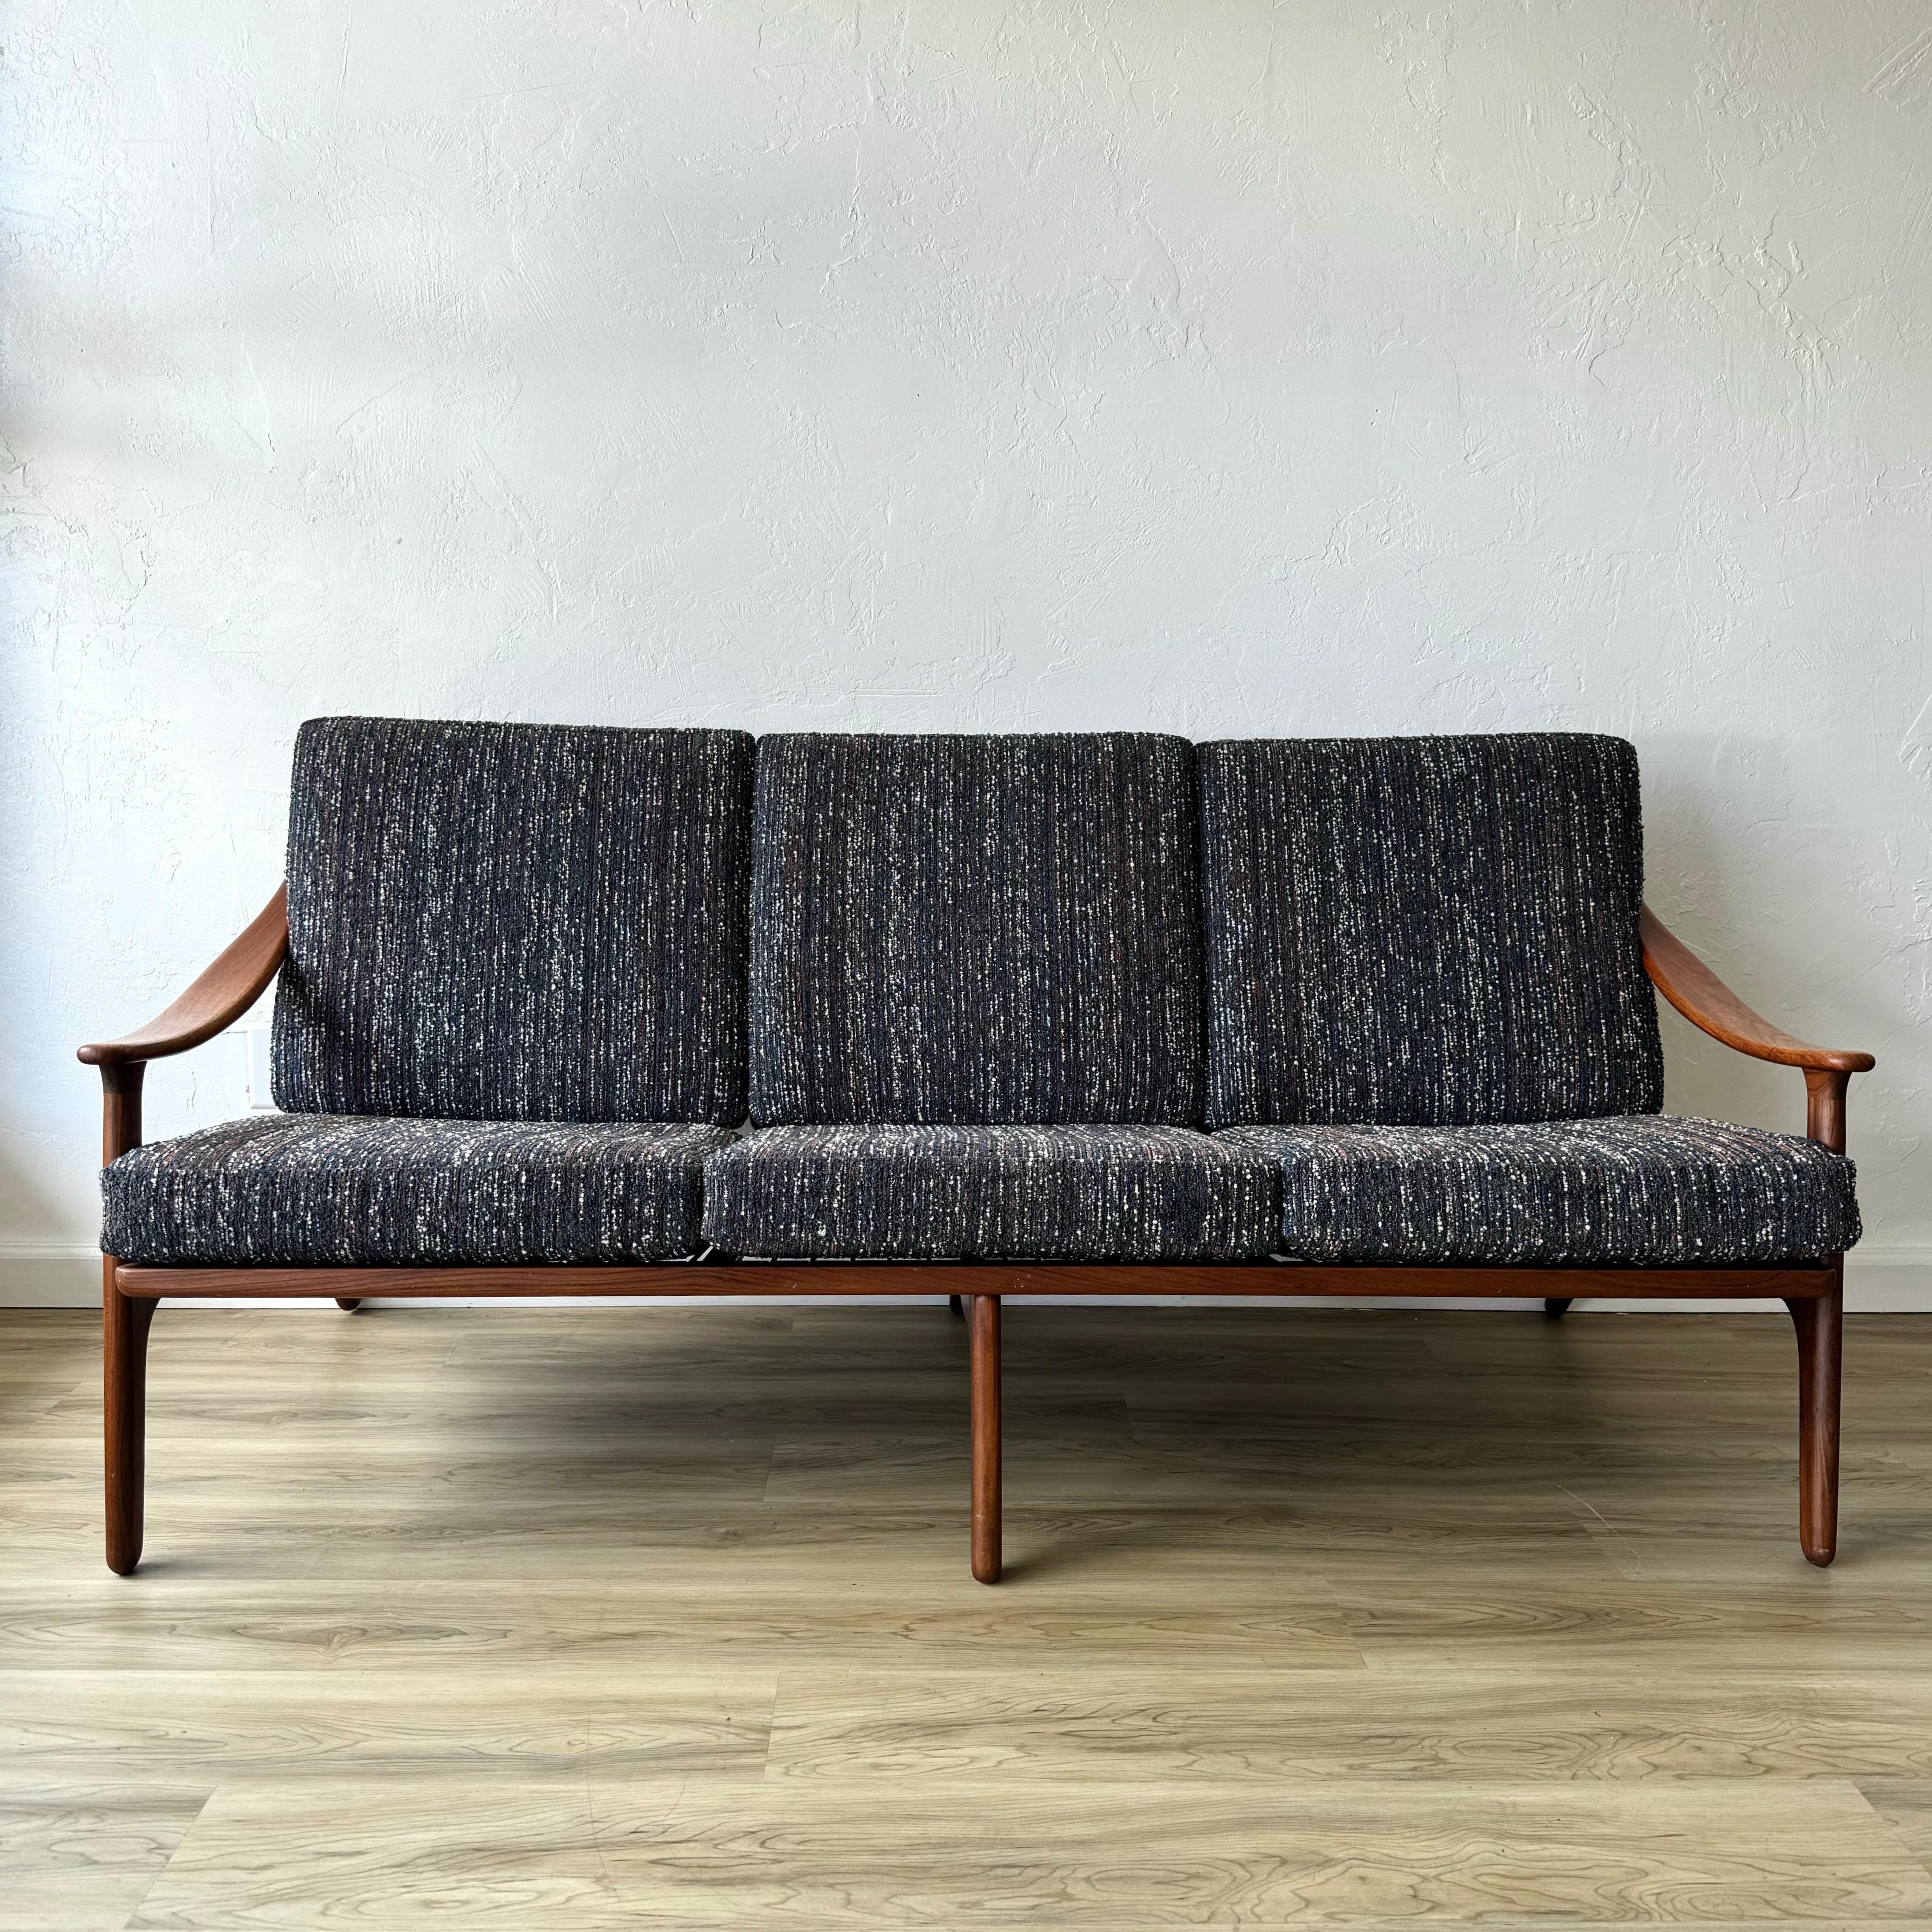 A finely restored sculptural teak sofa by designer Arne Hovmand Olsen for Komfort. Made in Denmark in the late 50s or early 60s. It has been fully cleaned, oiled and new cushions made with a period correct, textural fabric. 
